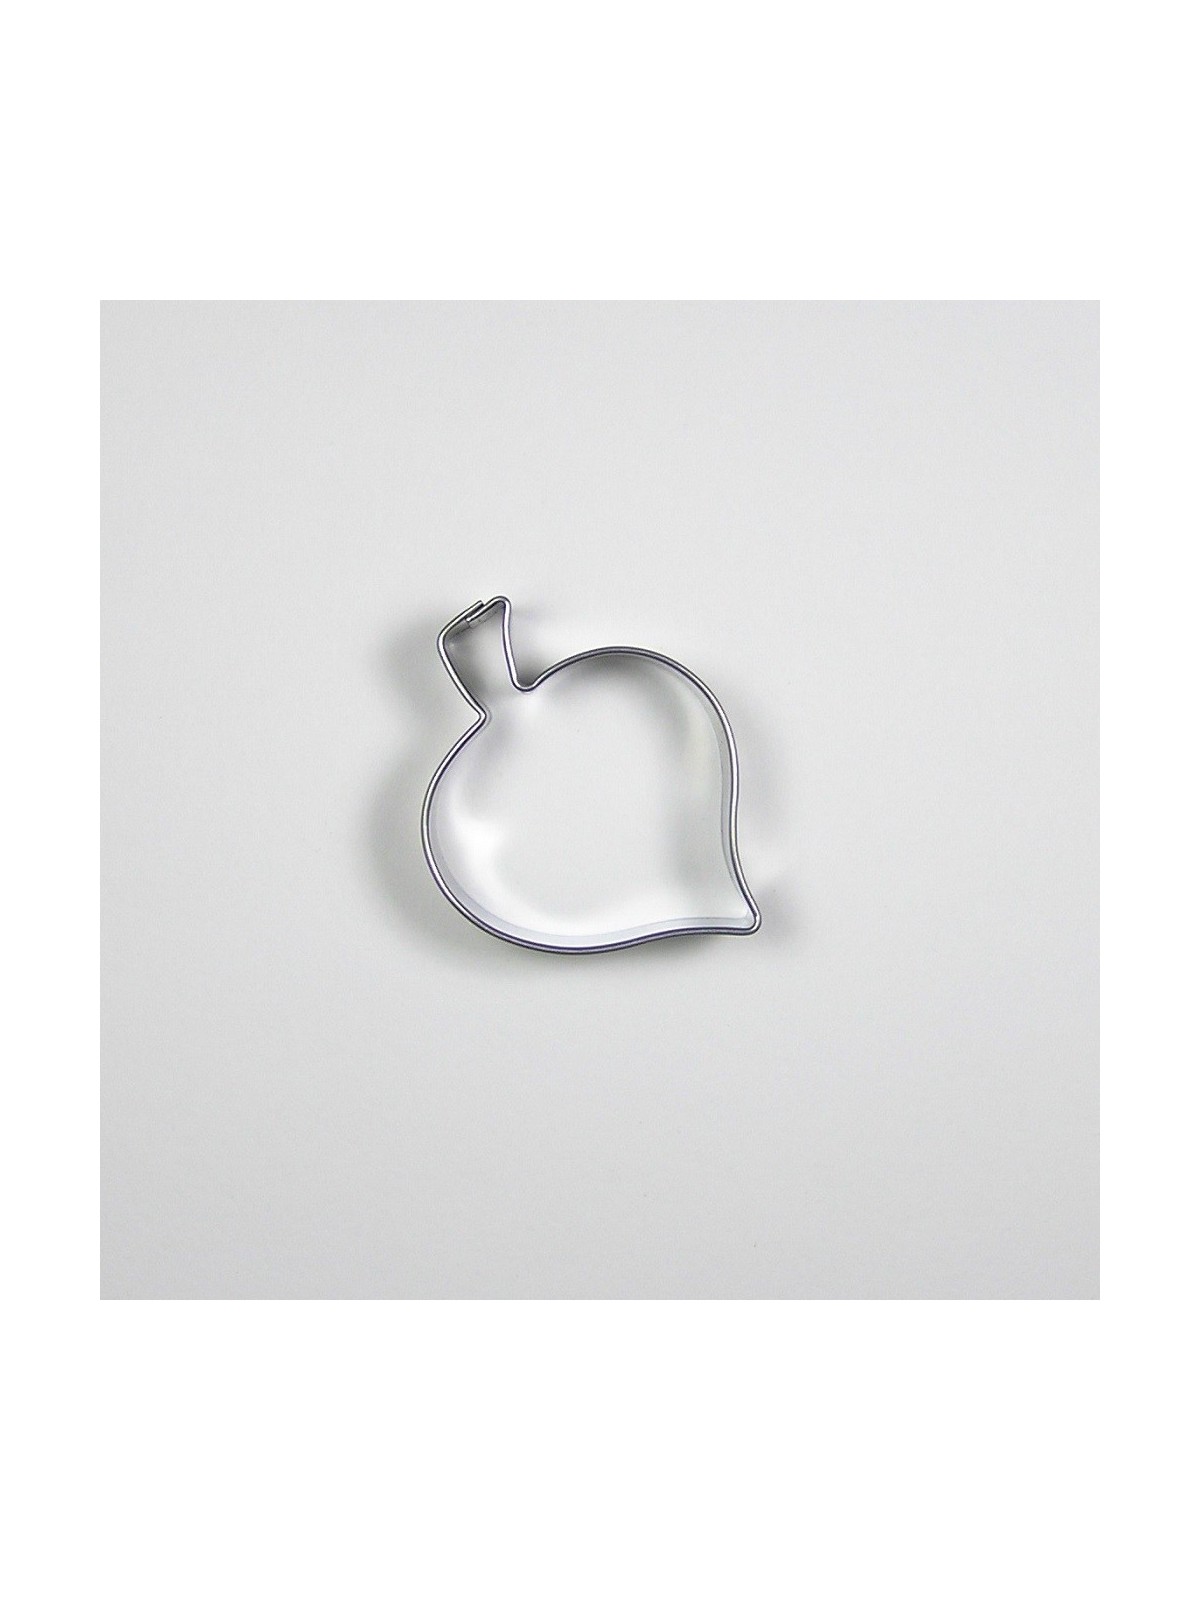 Stainless steel cookie cutter - linden leaf